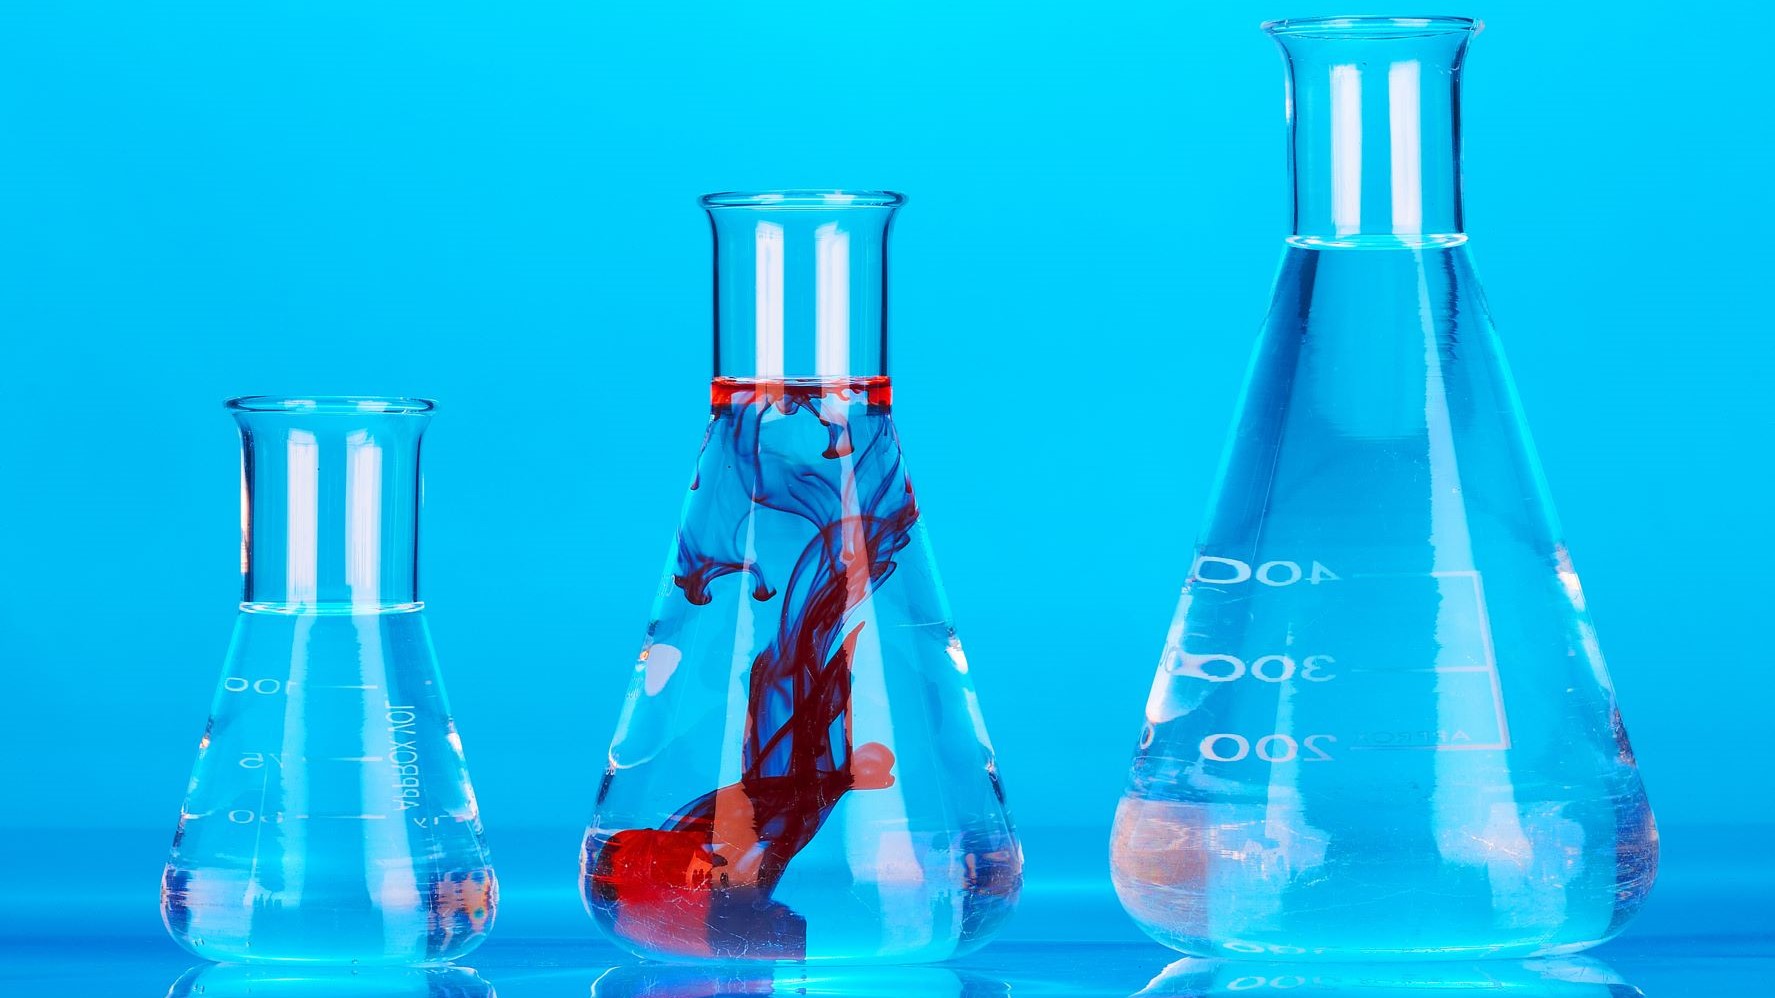 Three chemistry beakers filled with blue and red liquids.